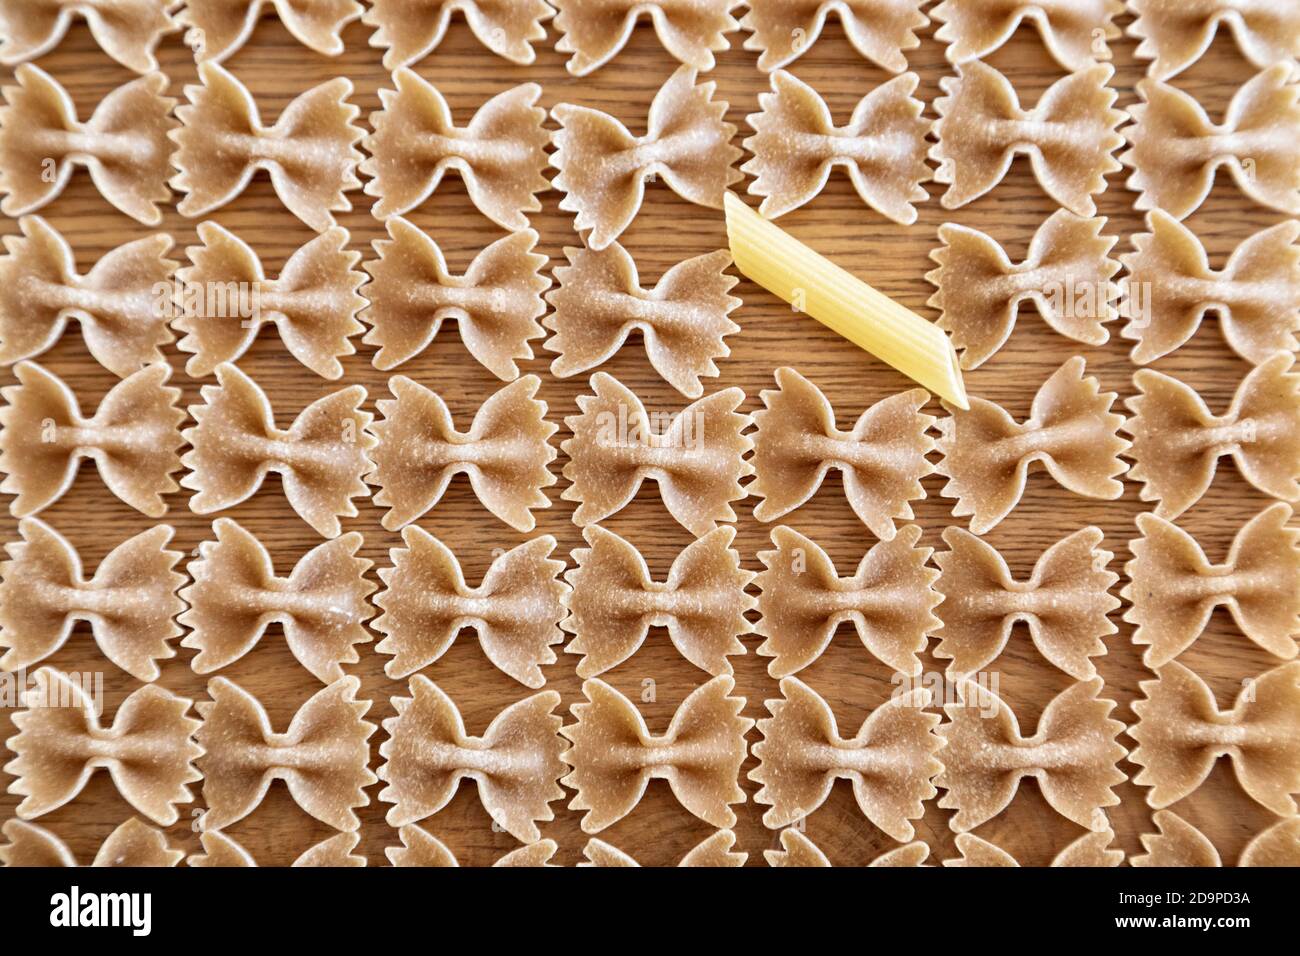 composition of durum wheat pasta, farfalle shape, repeated elements, abstract background Stock Photo